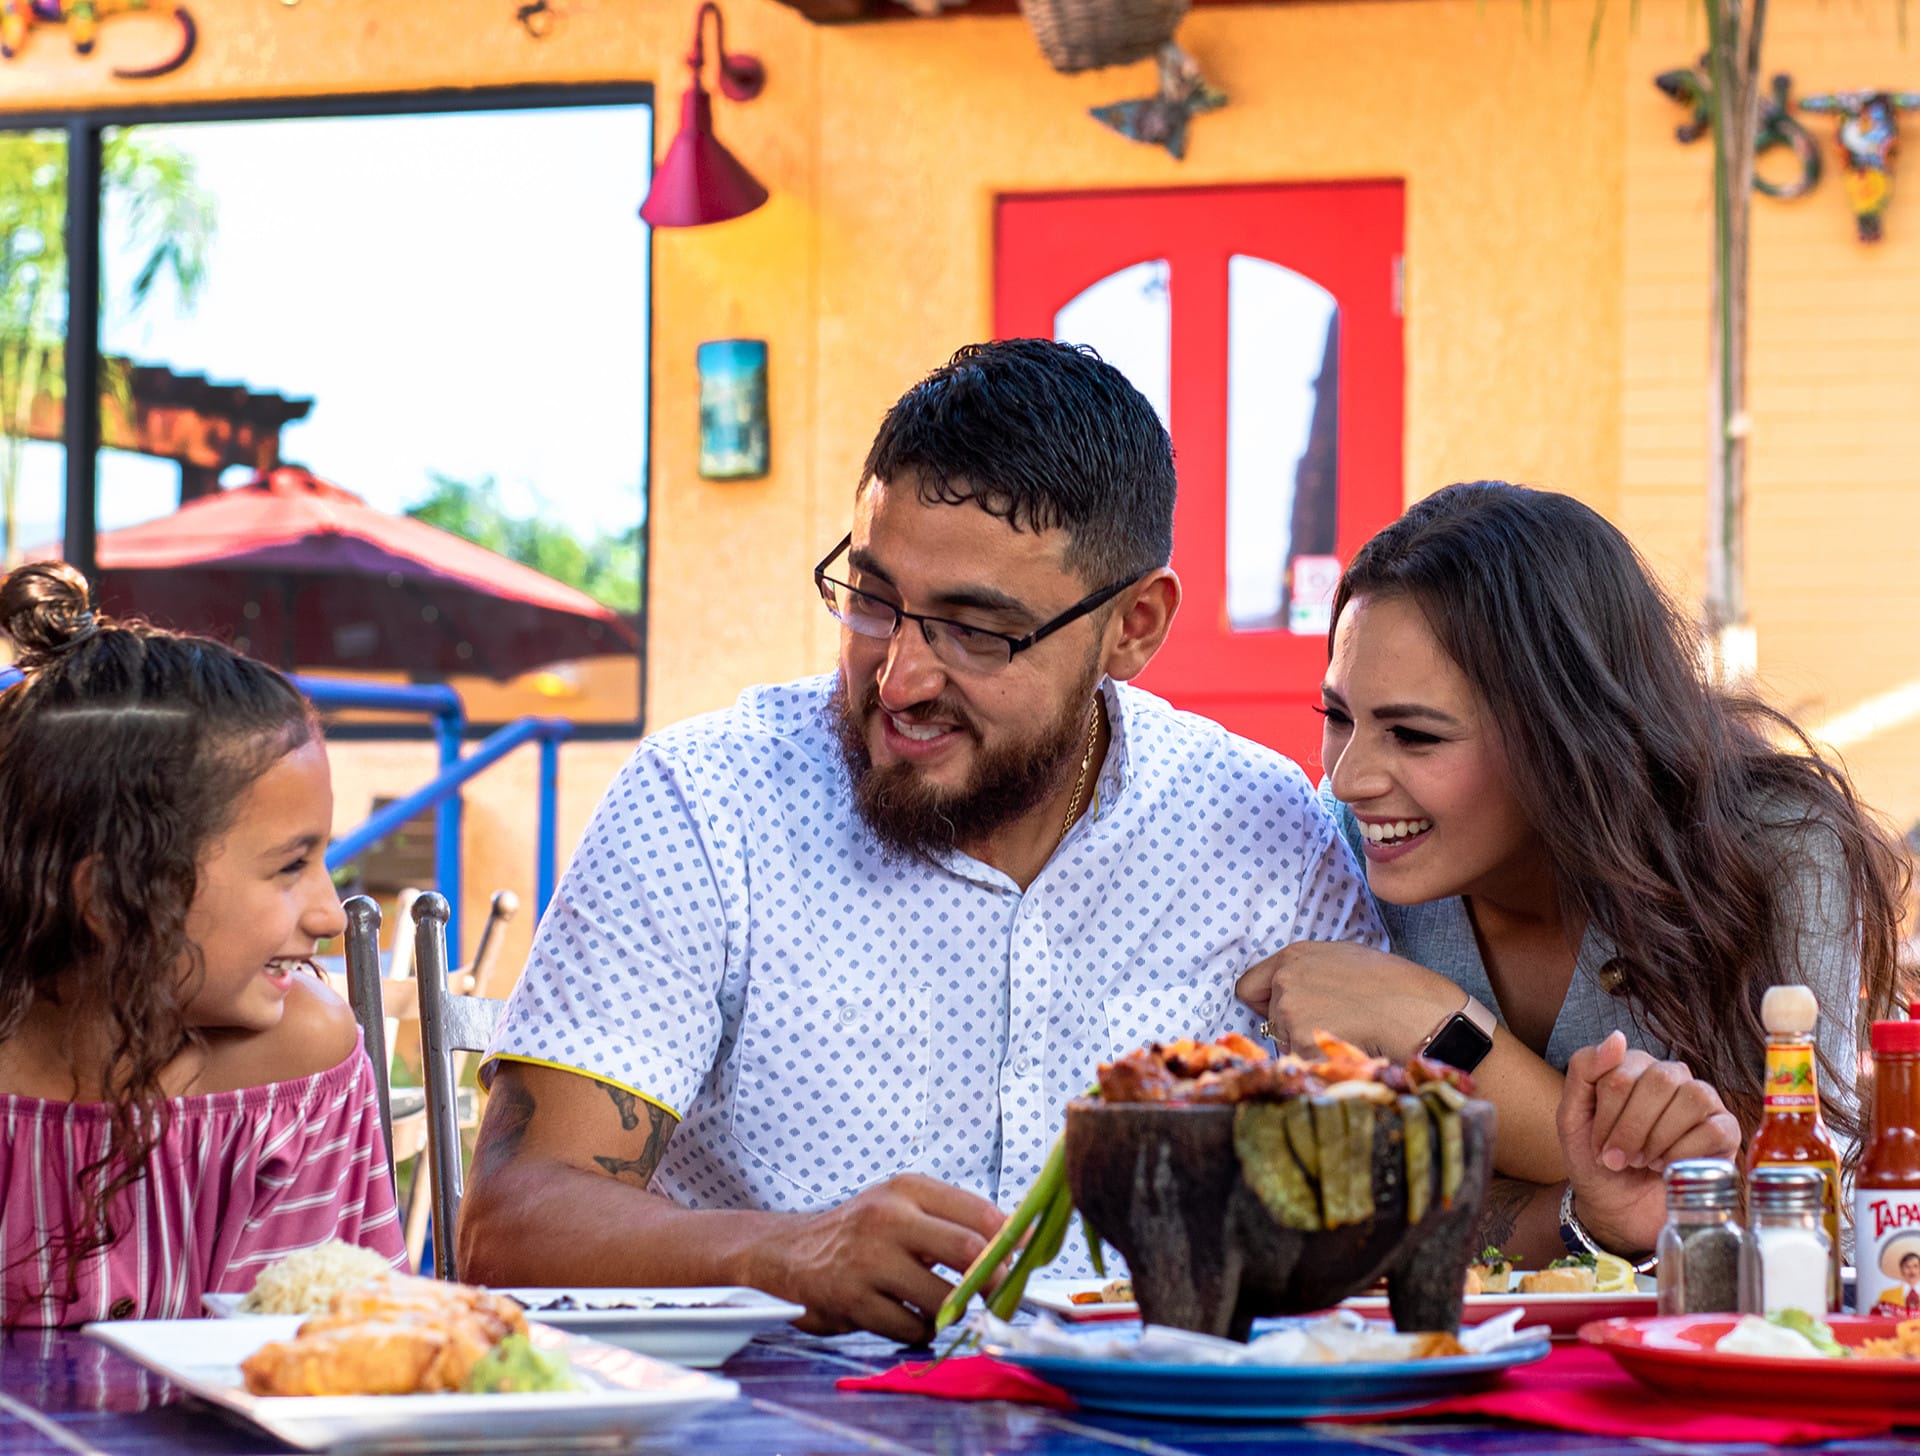 Parents laughing with their young daughter while enjoying a molcajete